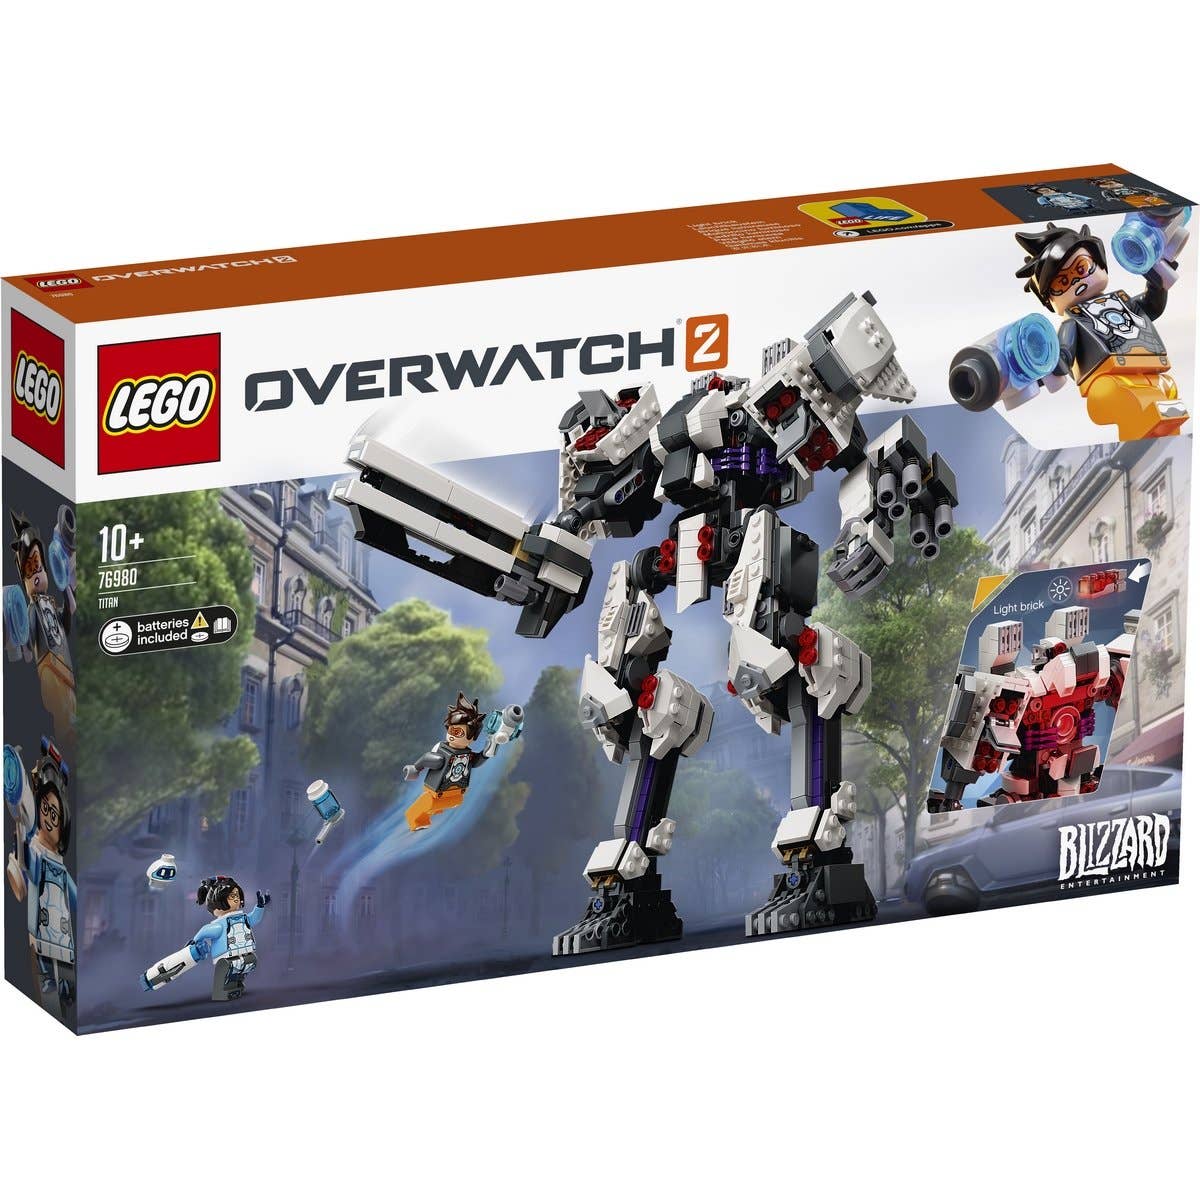 Learner Handel reparatøren LEGO delays release of Overwatch 2 set as it reviews its partnership with  Activision Blizzard | VG247